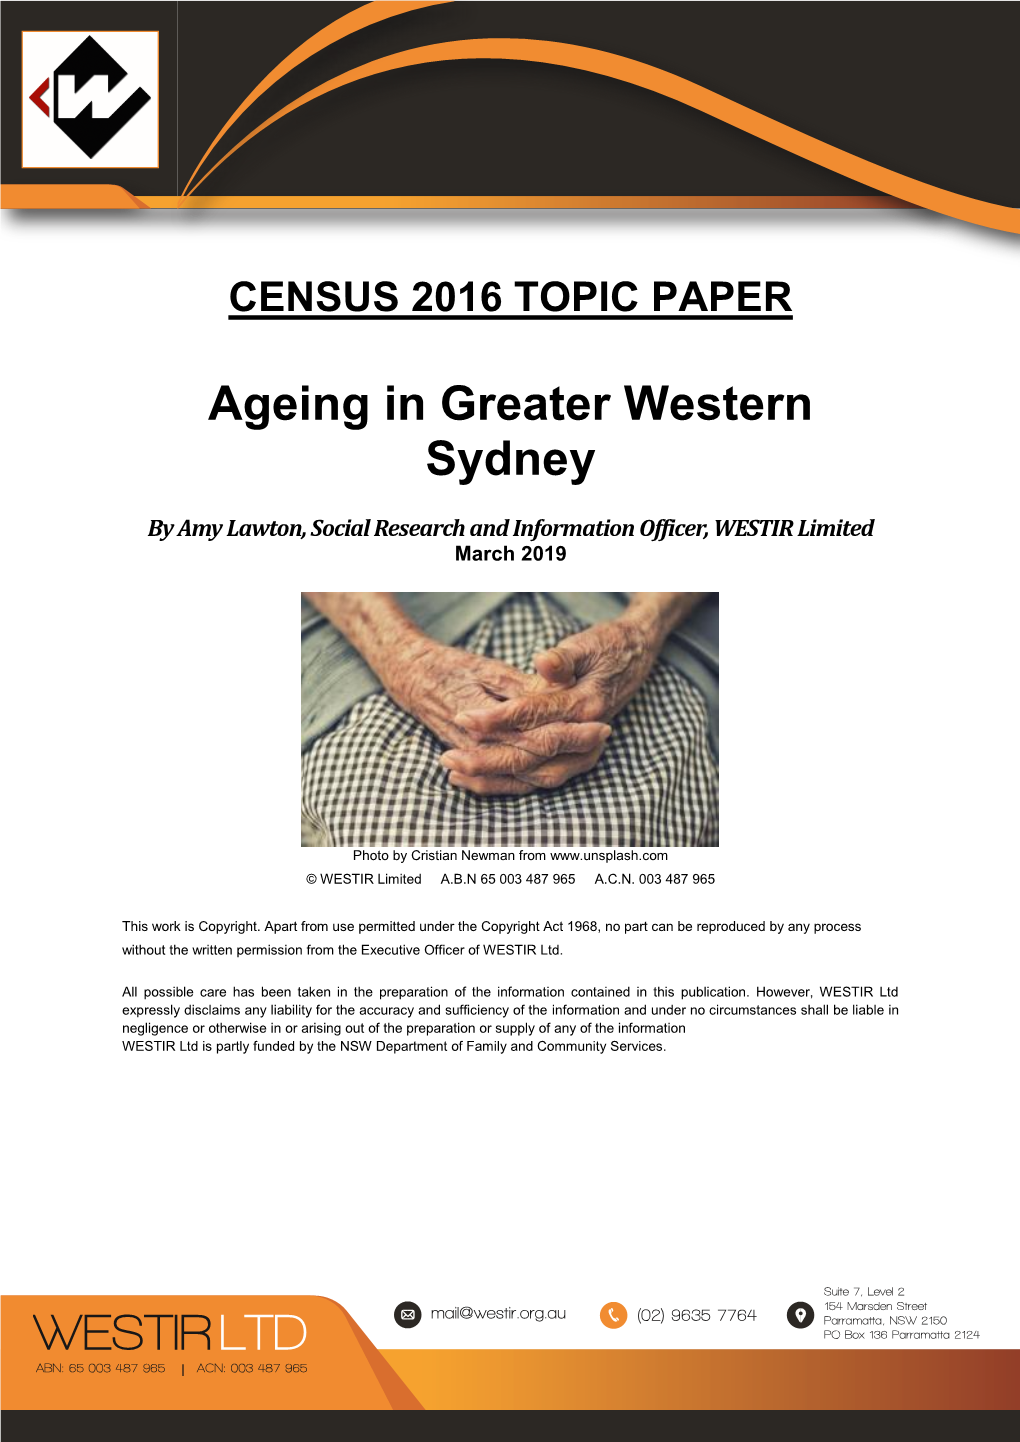 Ageing in Greater Western Sydney